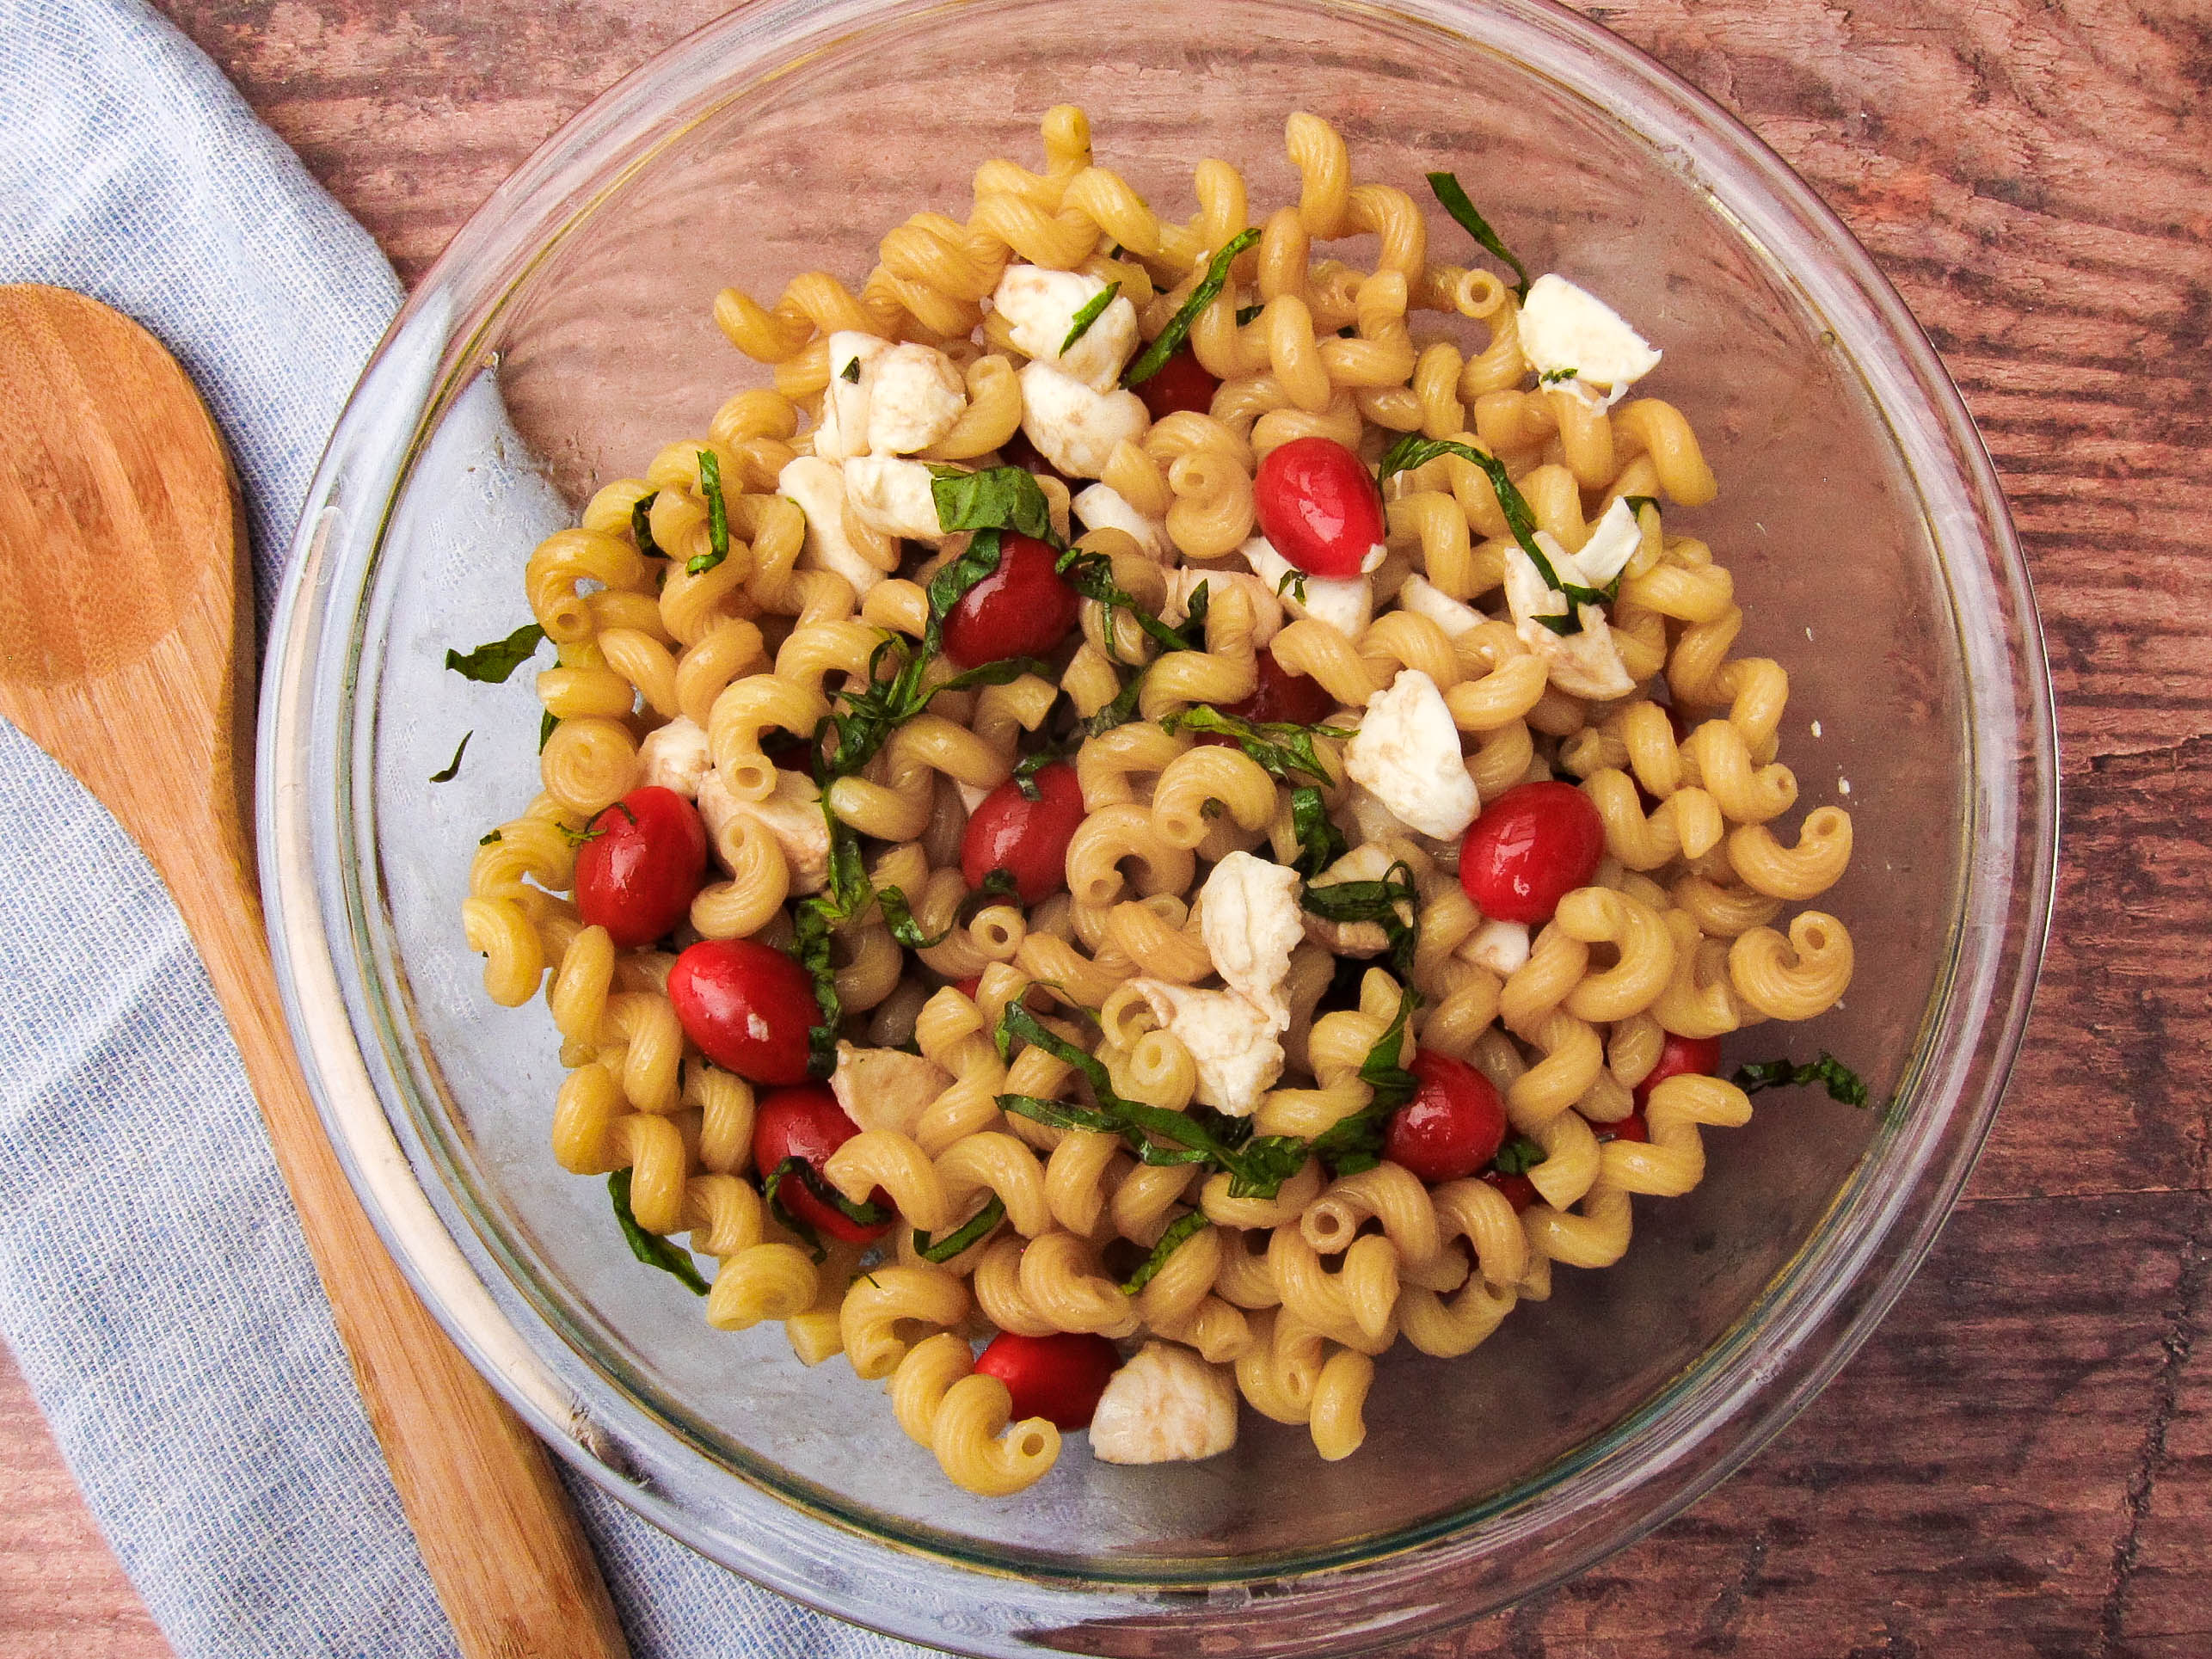 Bowl of pasta salad with wooden spoon.